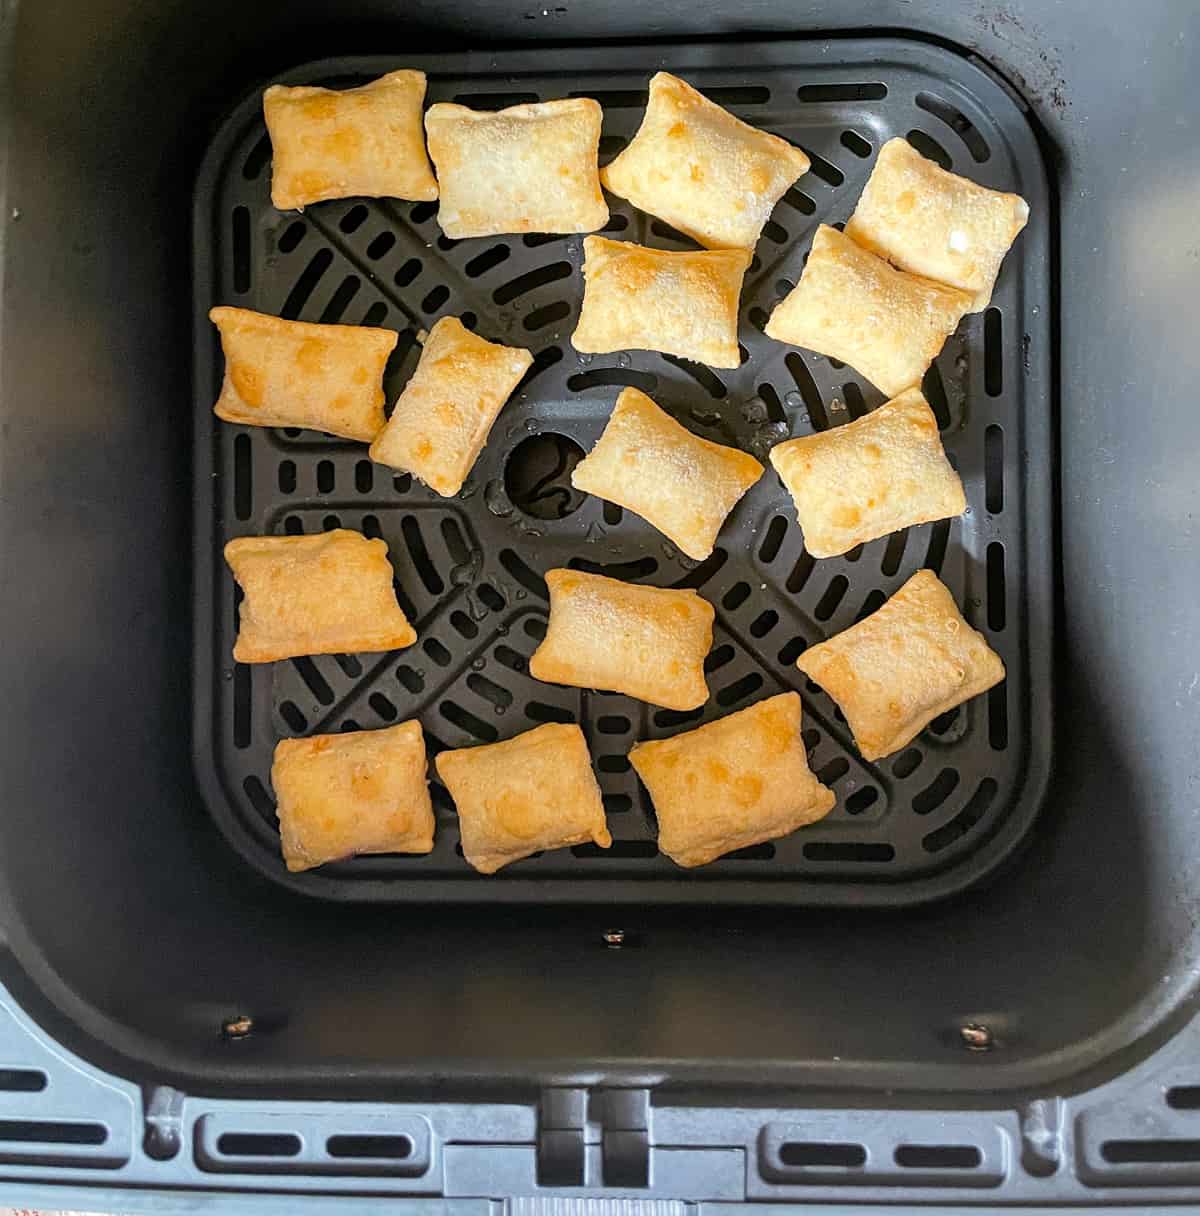 Air fryer pizza rolls after being heated up in air fryer basket